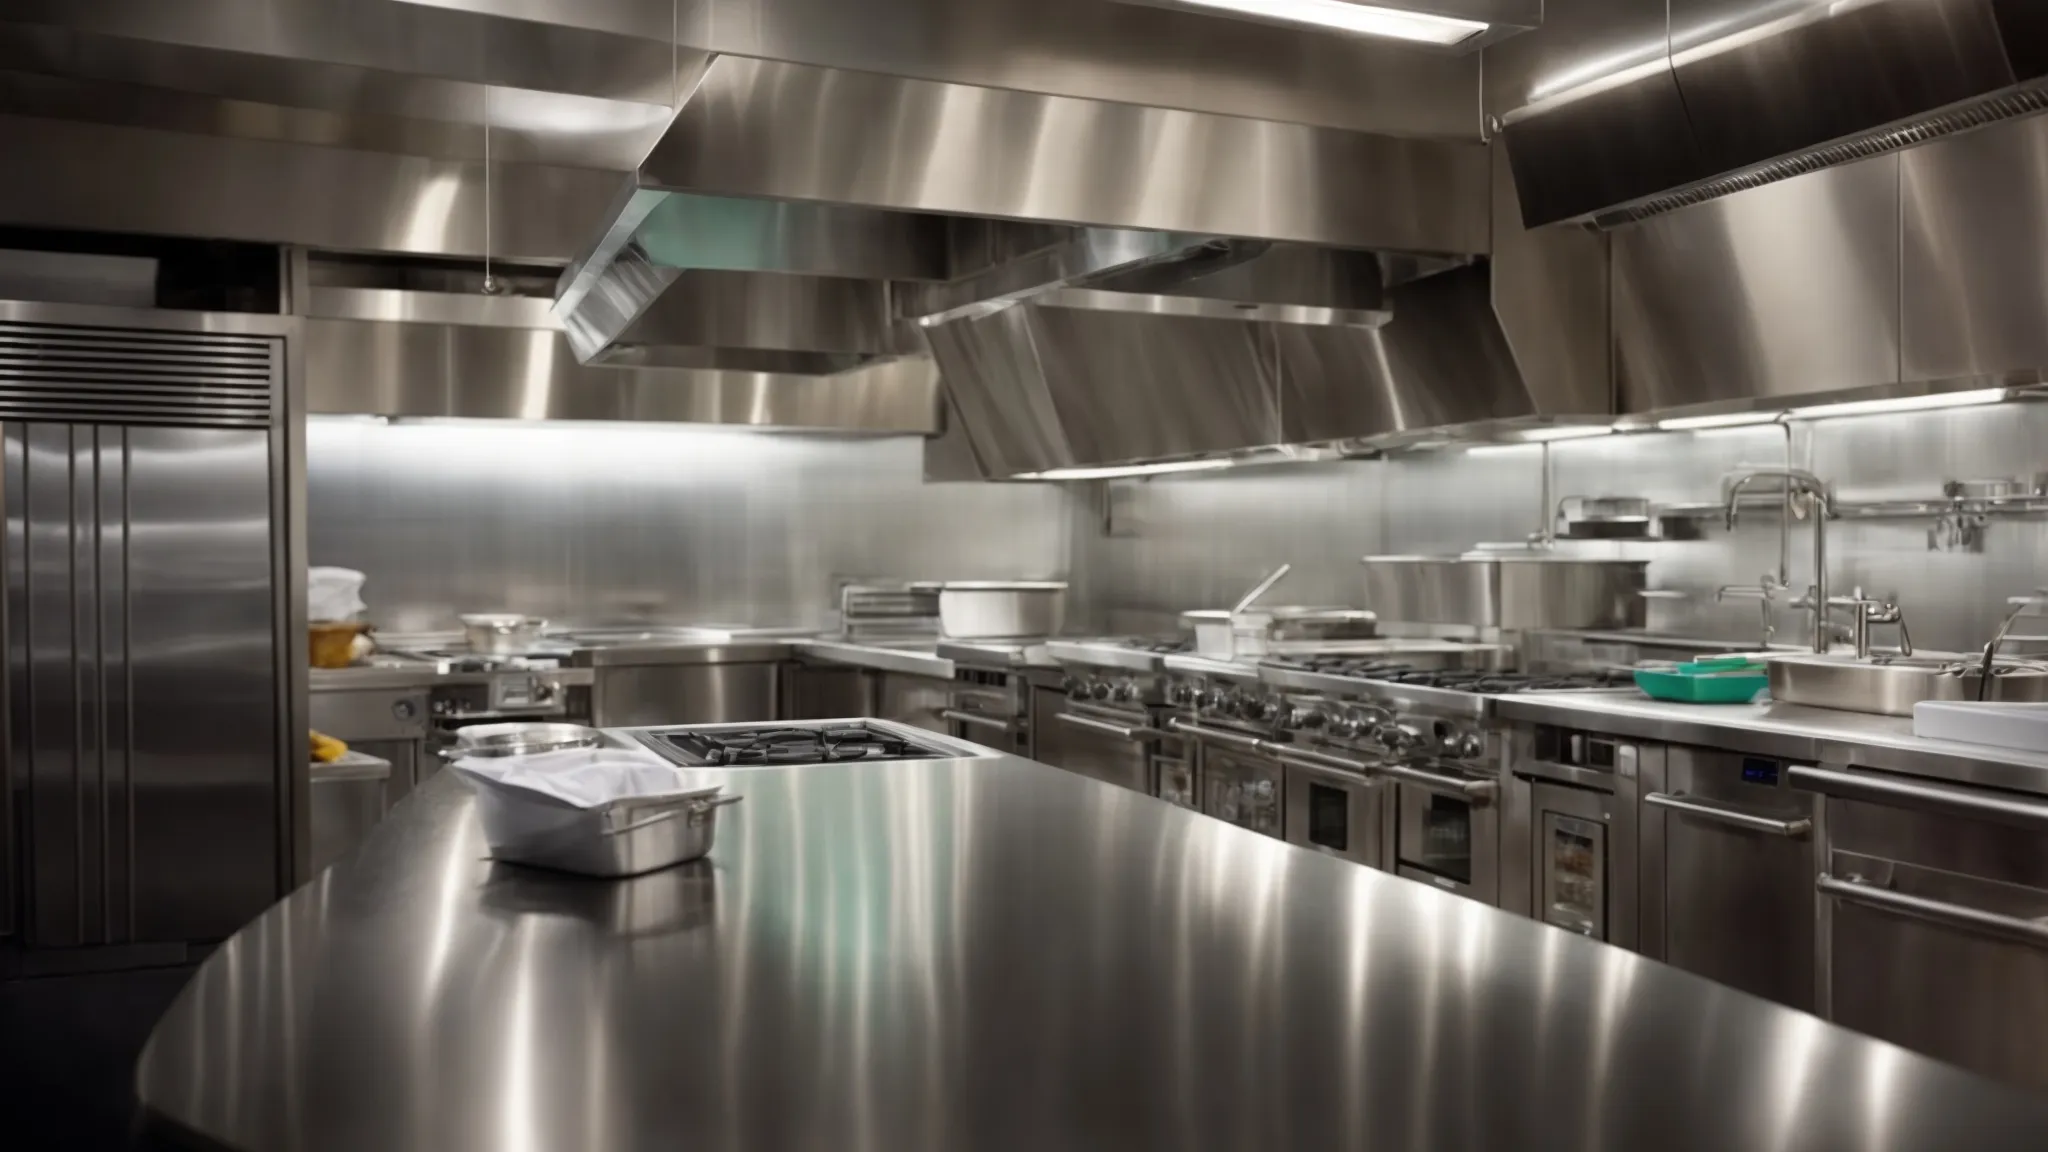 a professional inspector reviews a well-organized file on a clean, stainless steel kitchen counter, illuminated by the overhead lights of a commercial kitchen.